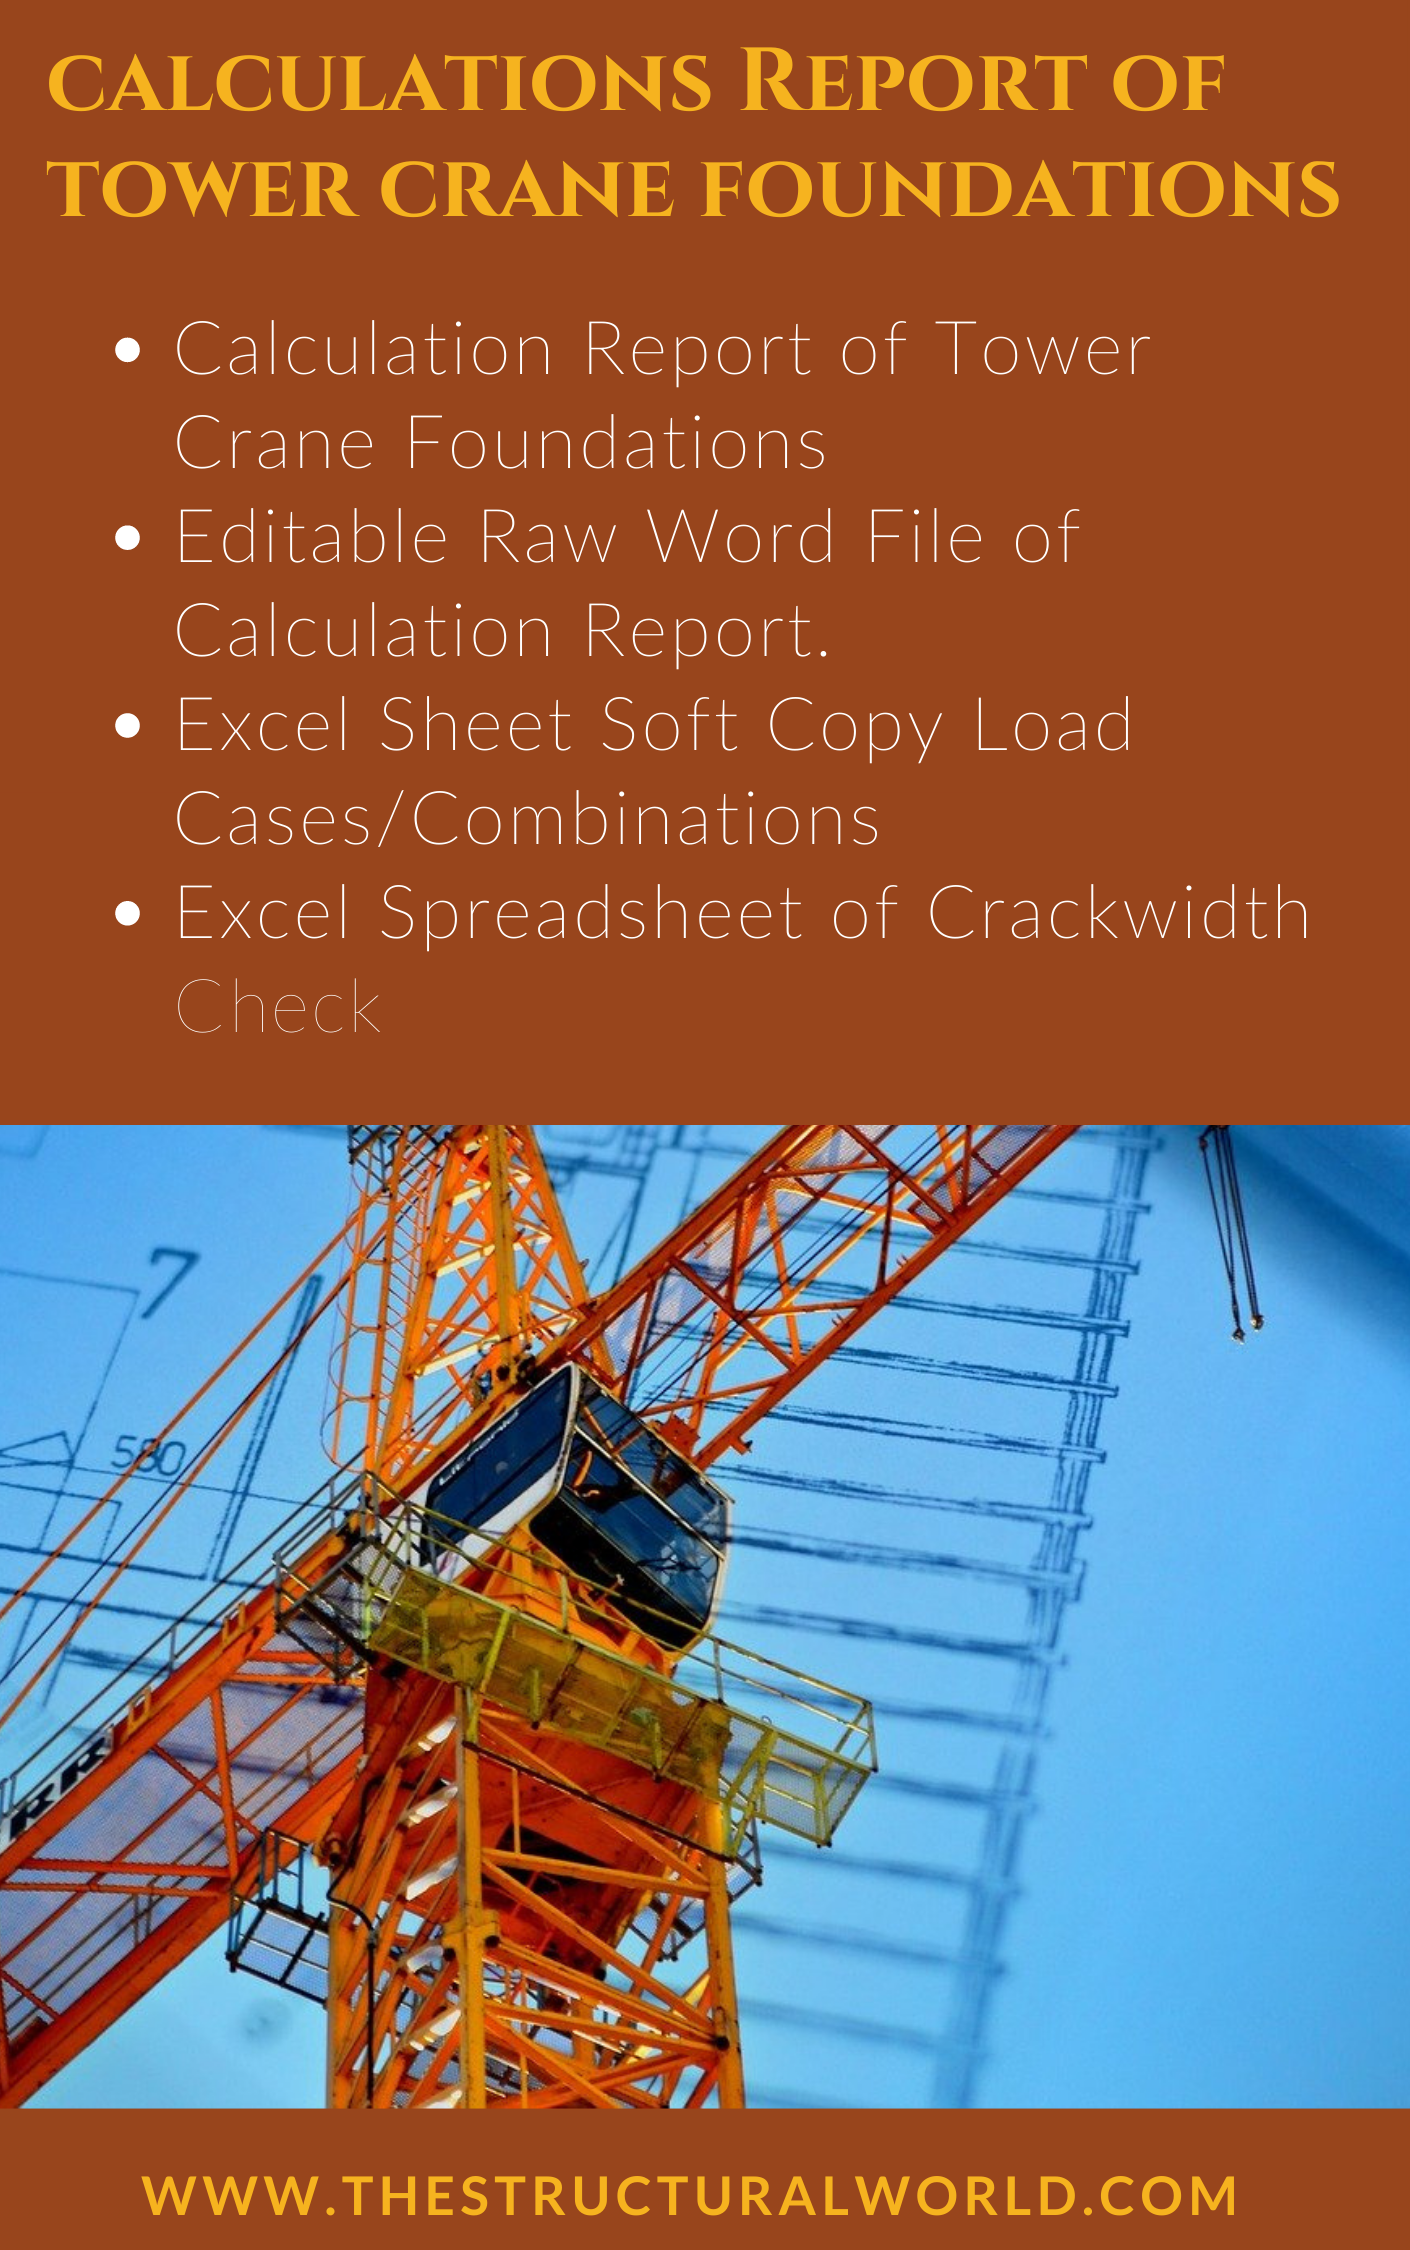 Calculation Report Practical Guide: Tower Crane Foundation | The